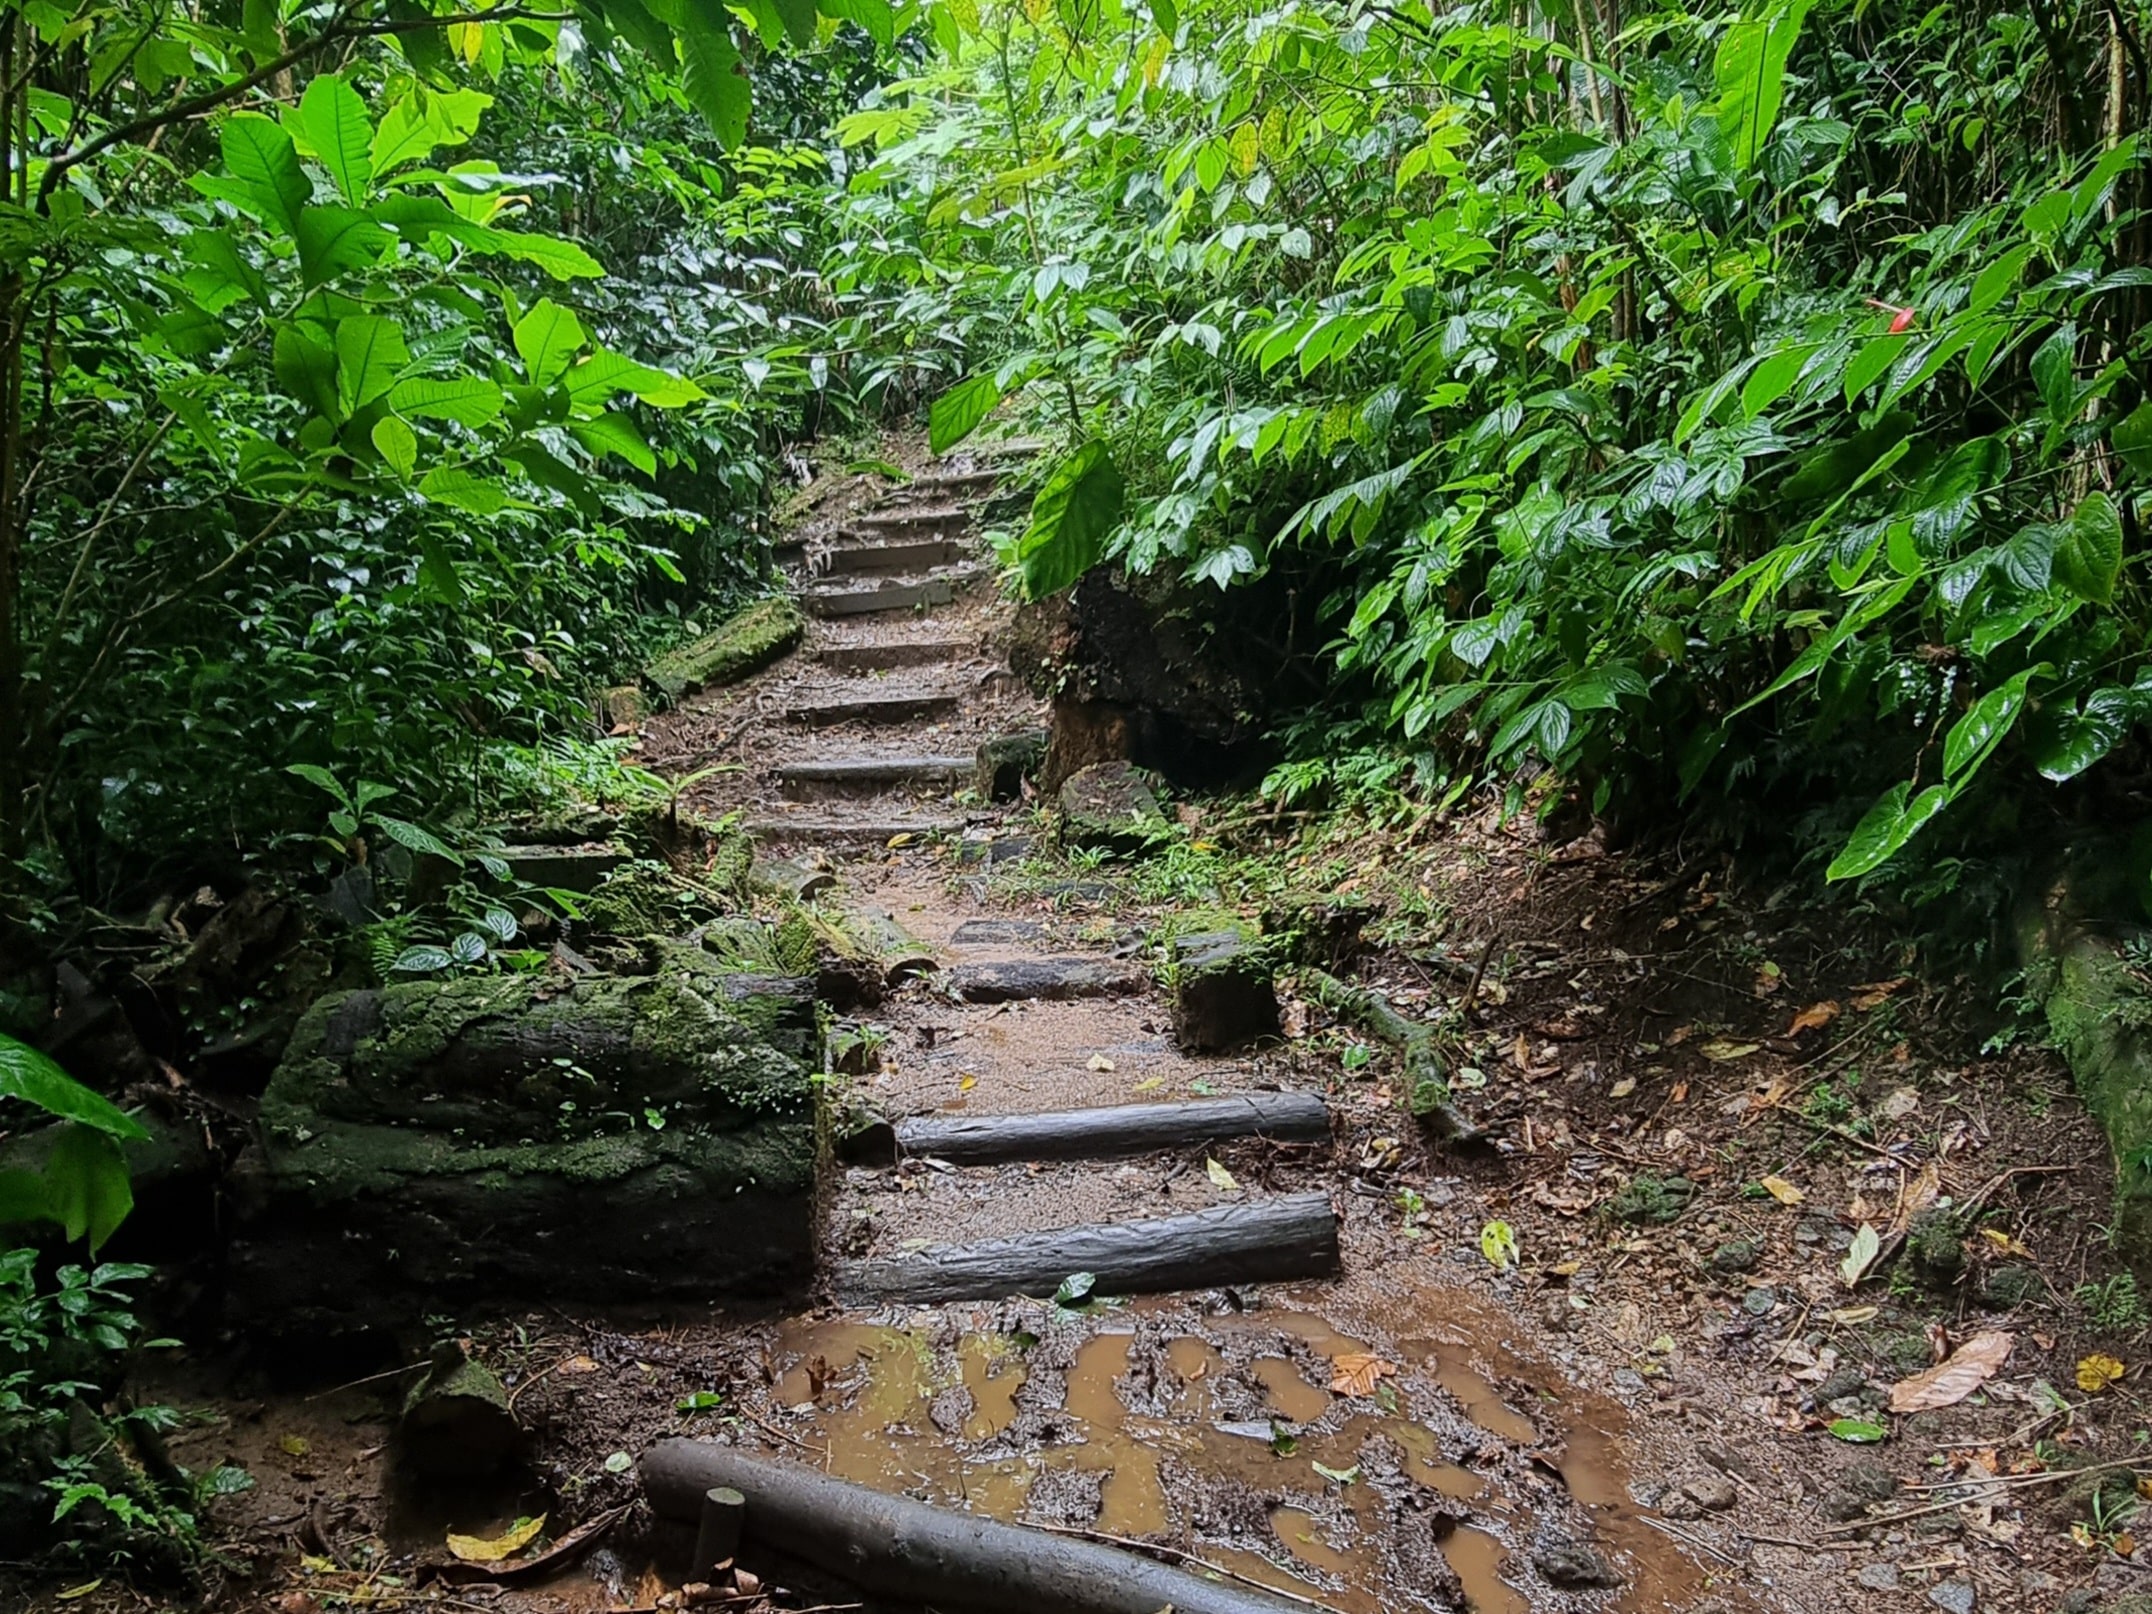 A lot of stairs on the trail